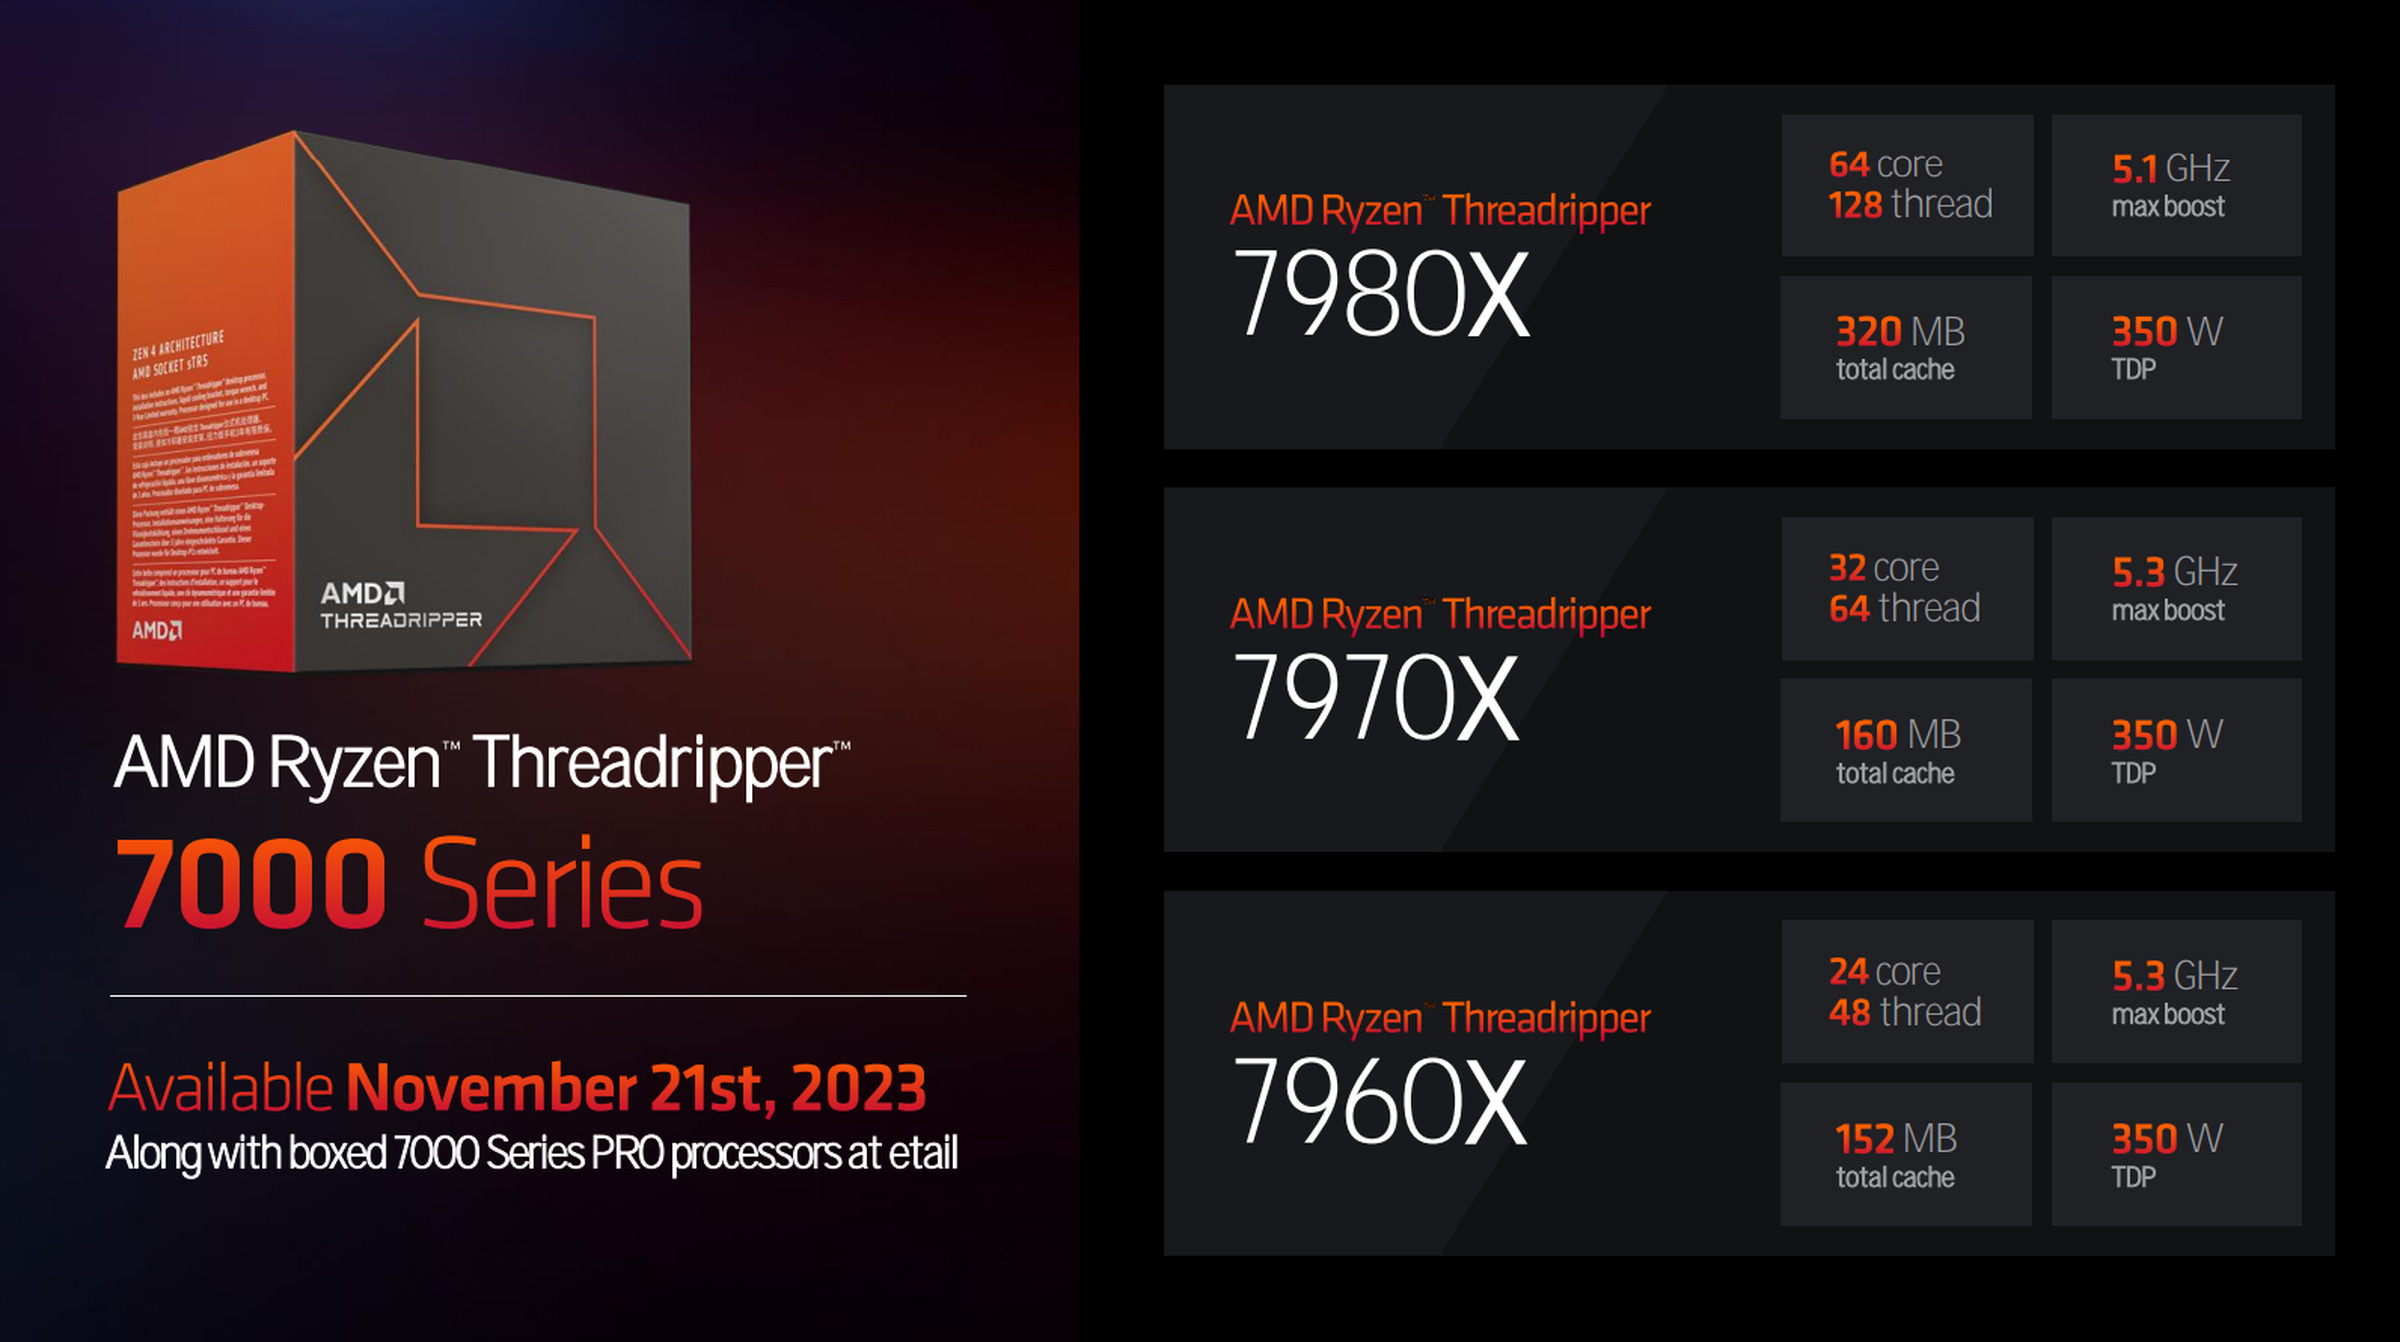 The HEDT Threadripper CPUs.